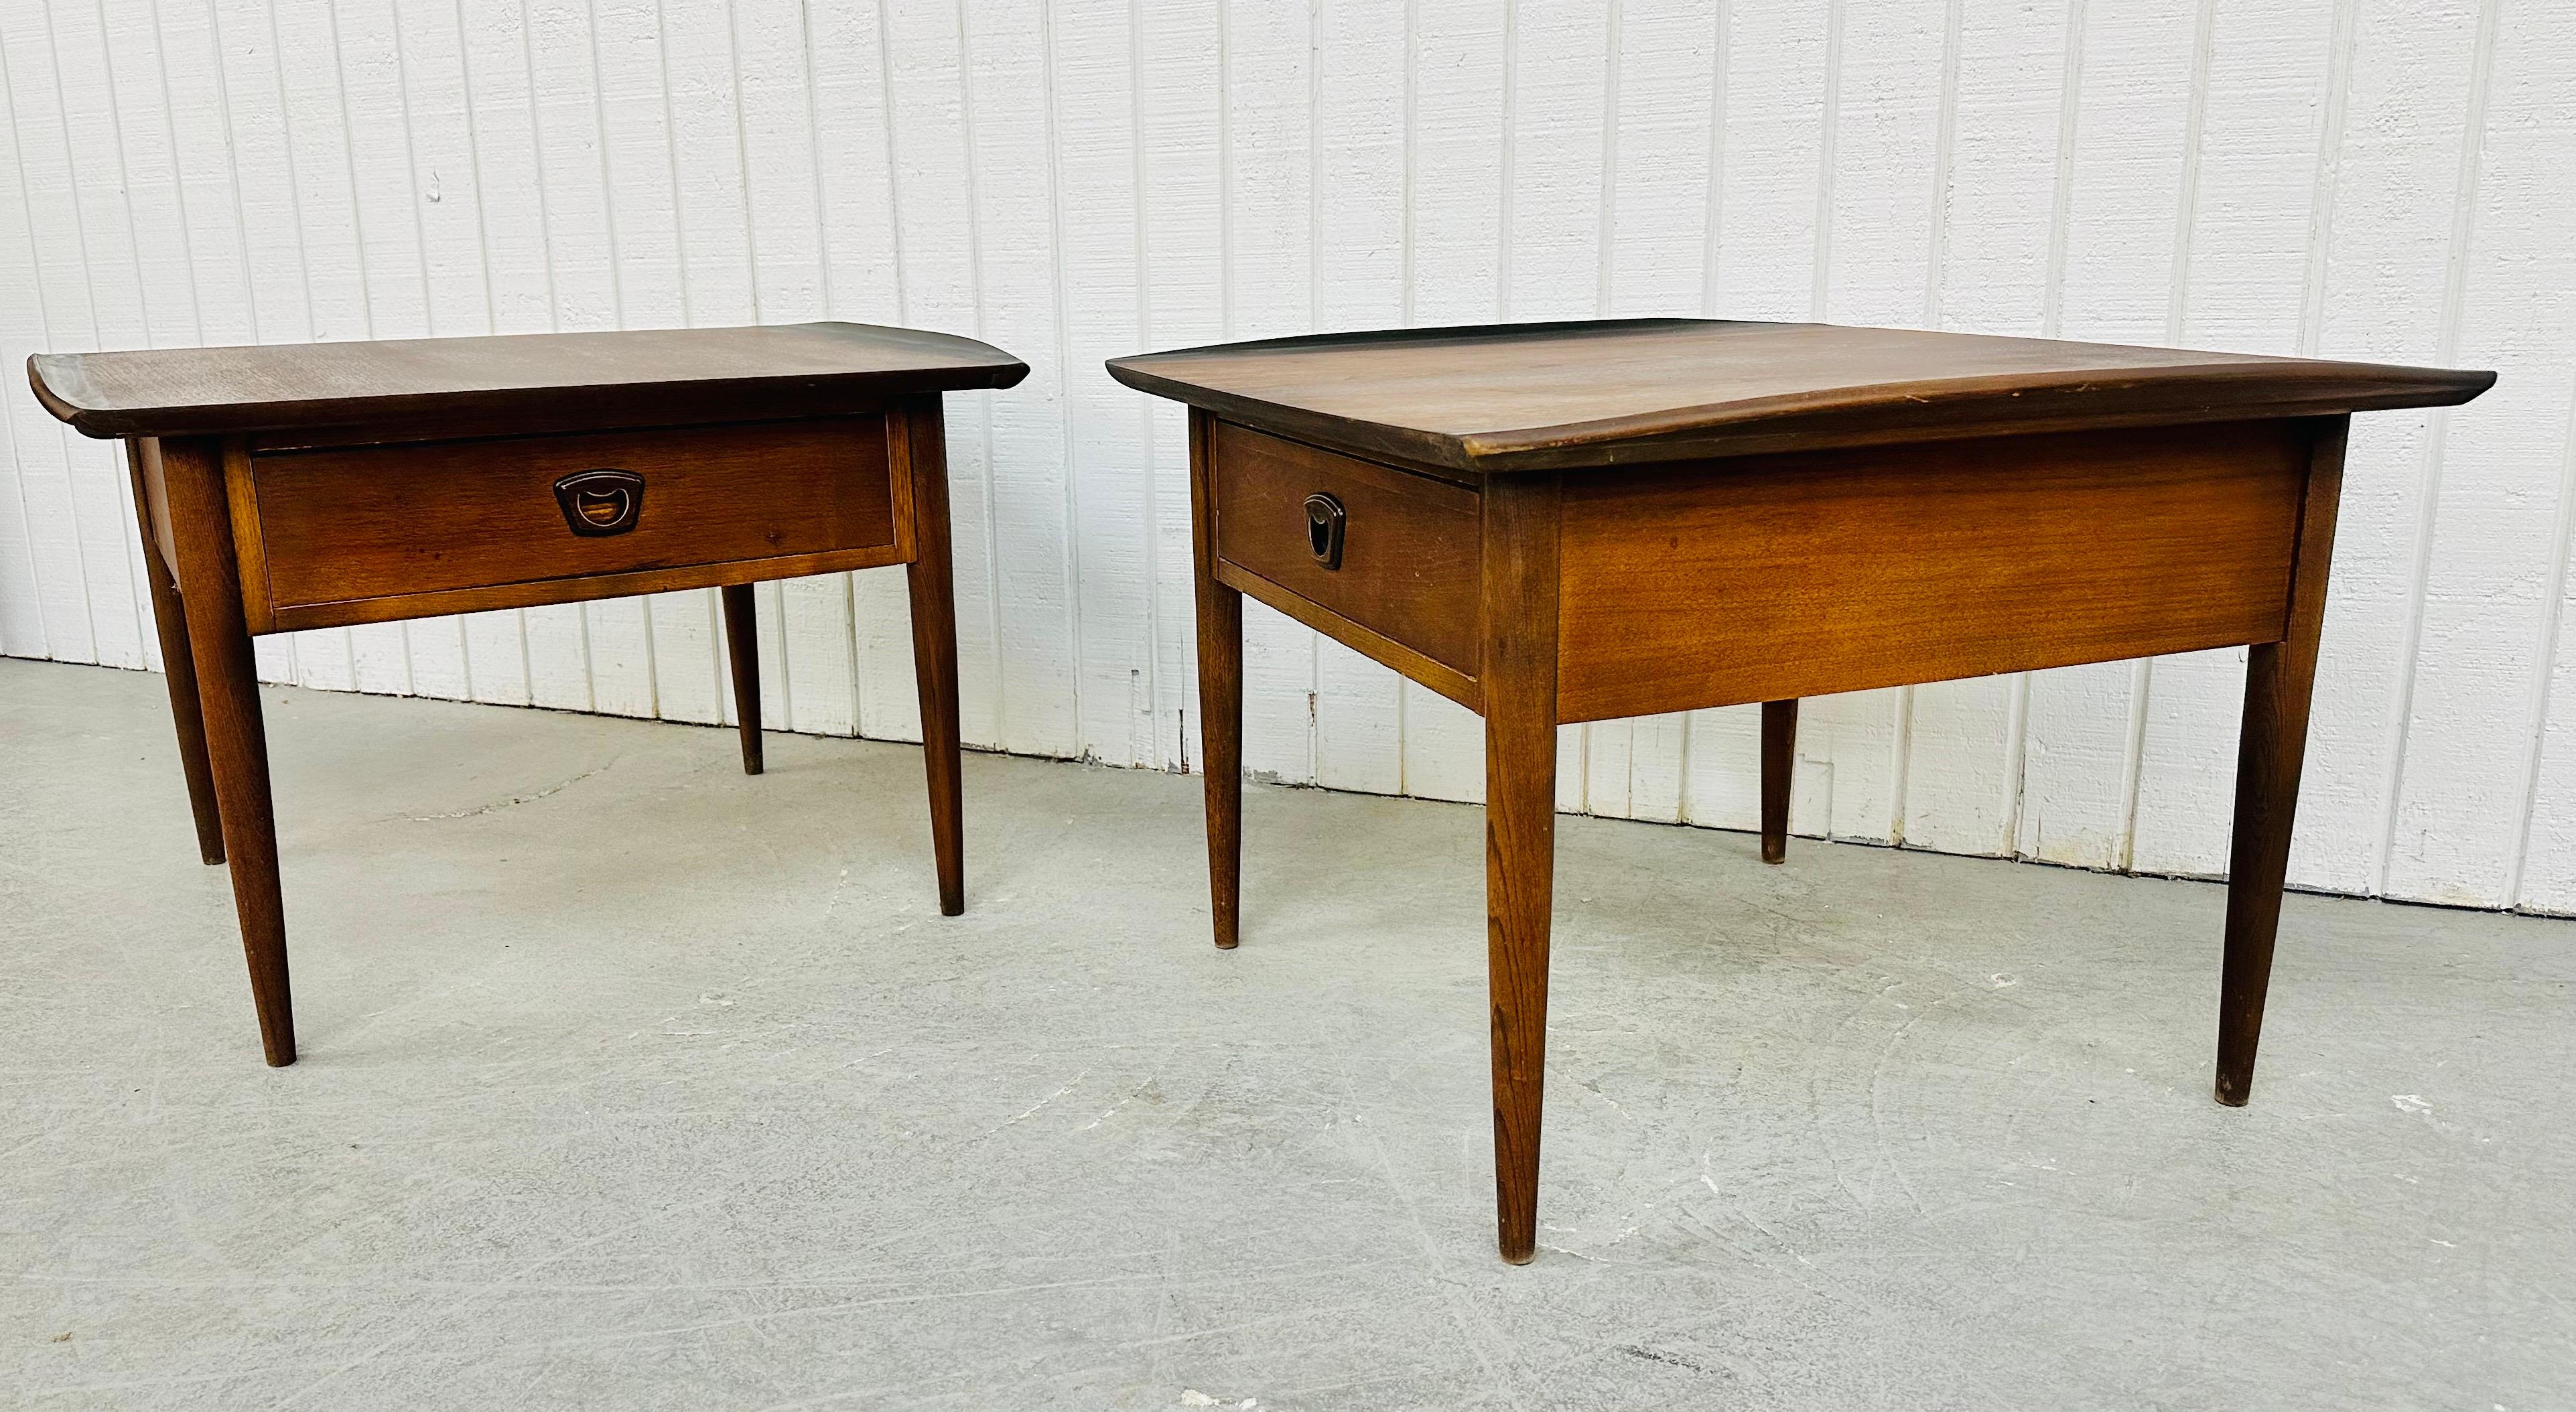 20th Century Mid-Century Modern Lane Walnut Side Tables - Set of 2 For Sale